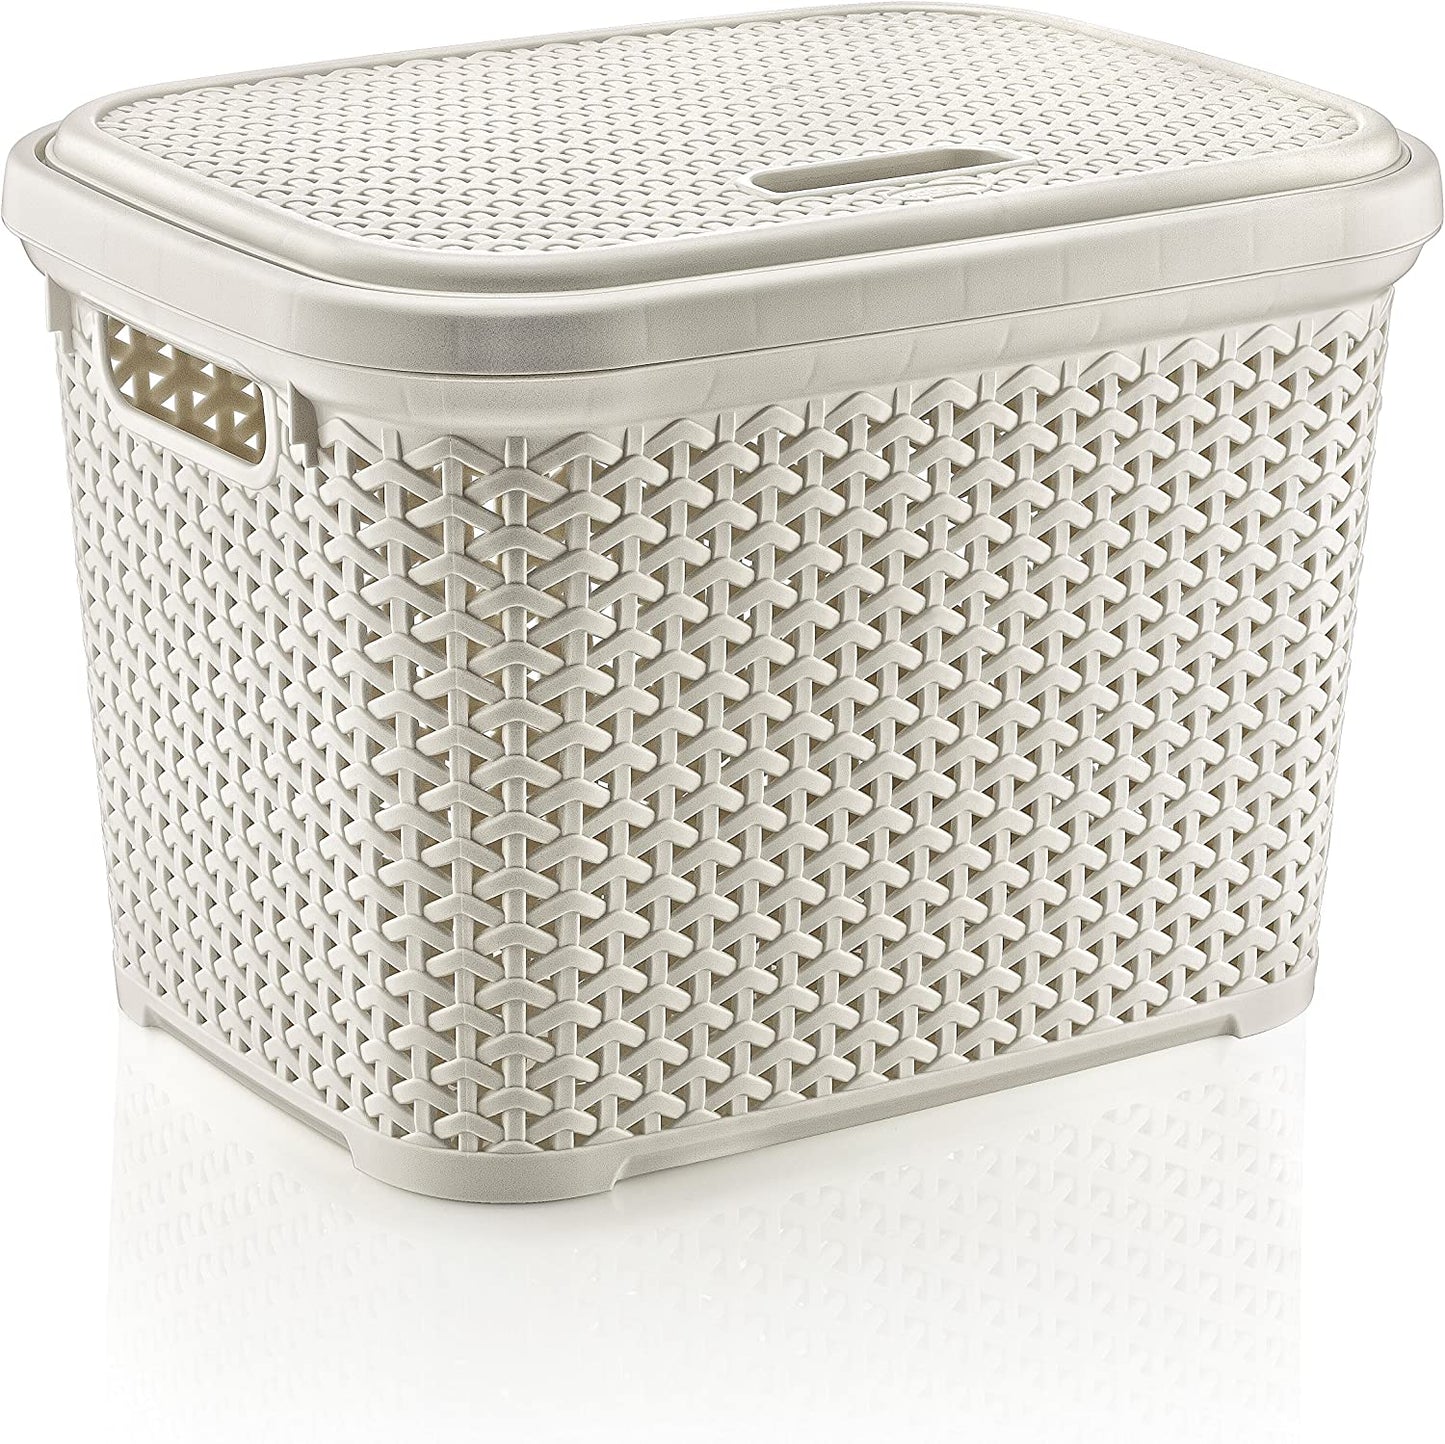 HOBBY LIFE 20 Litre Plastic Rattan Small Storage Box with Lid